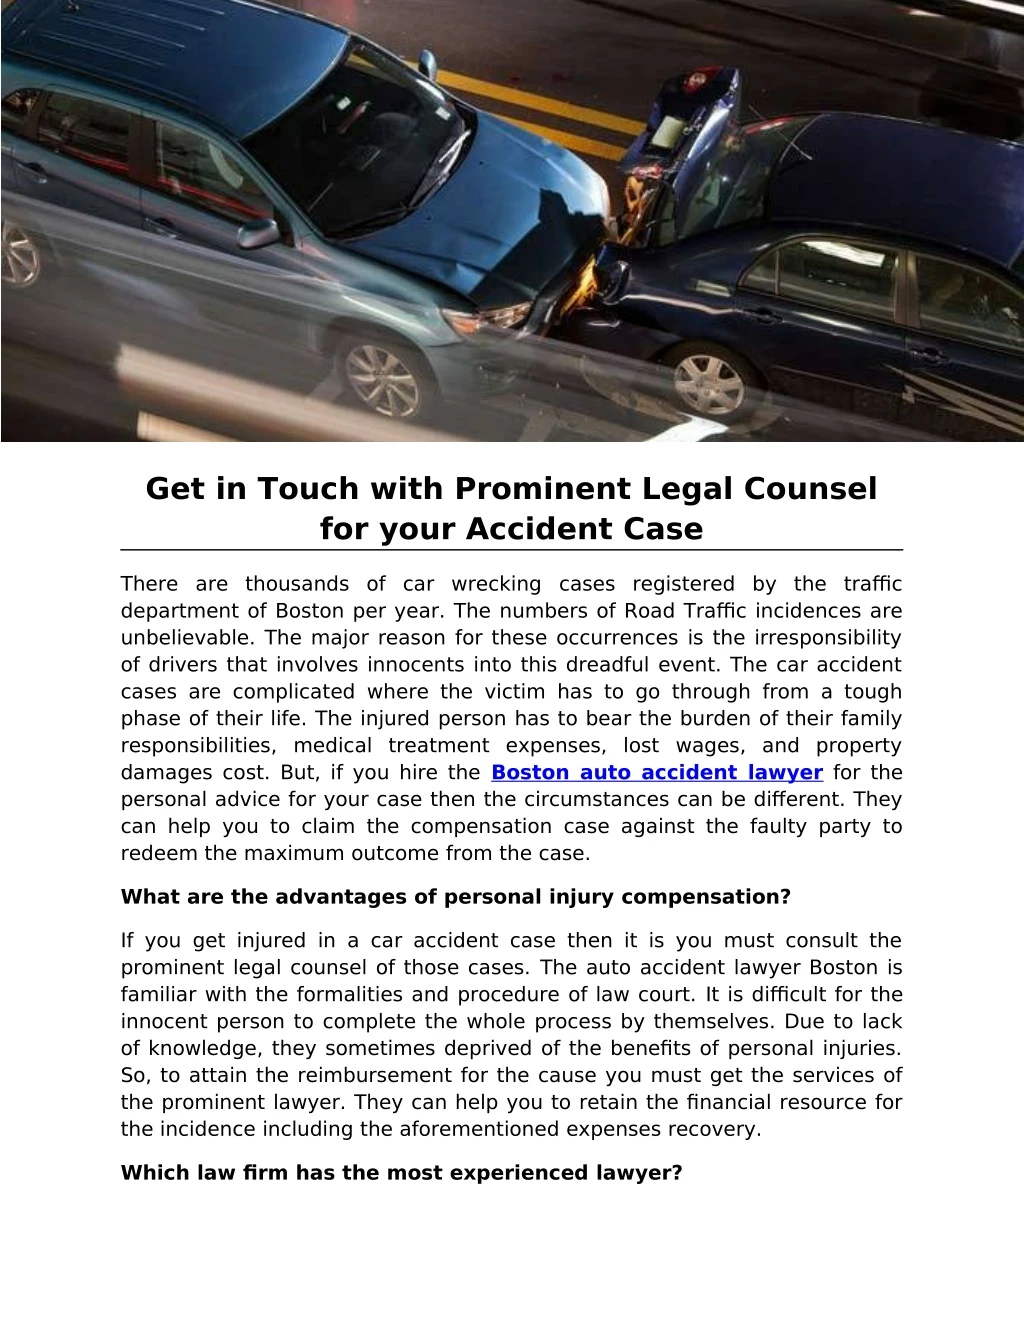 get in touch with prominent legal counsel